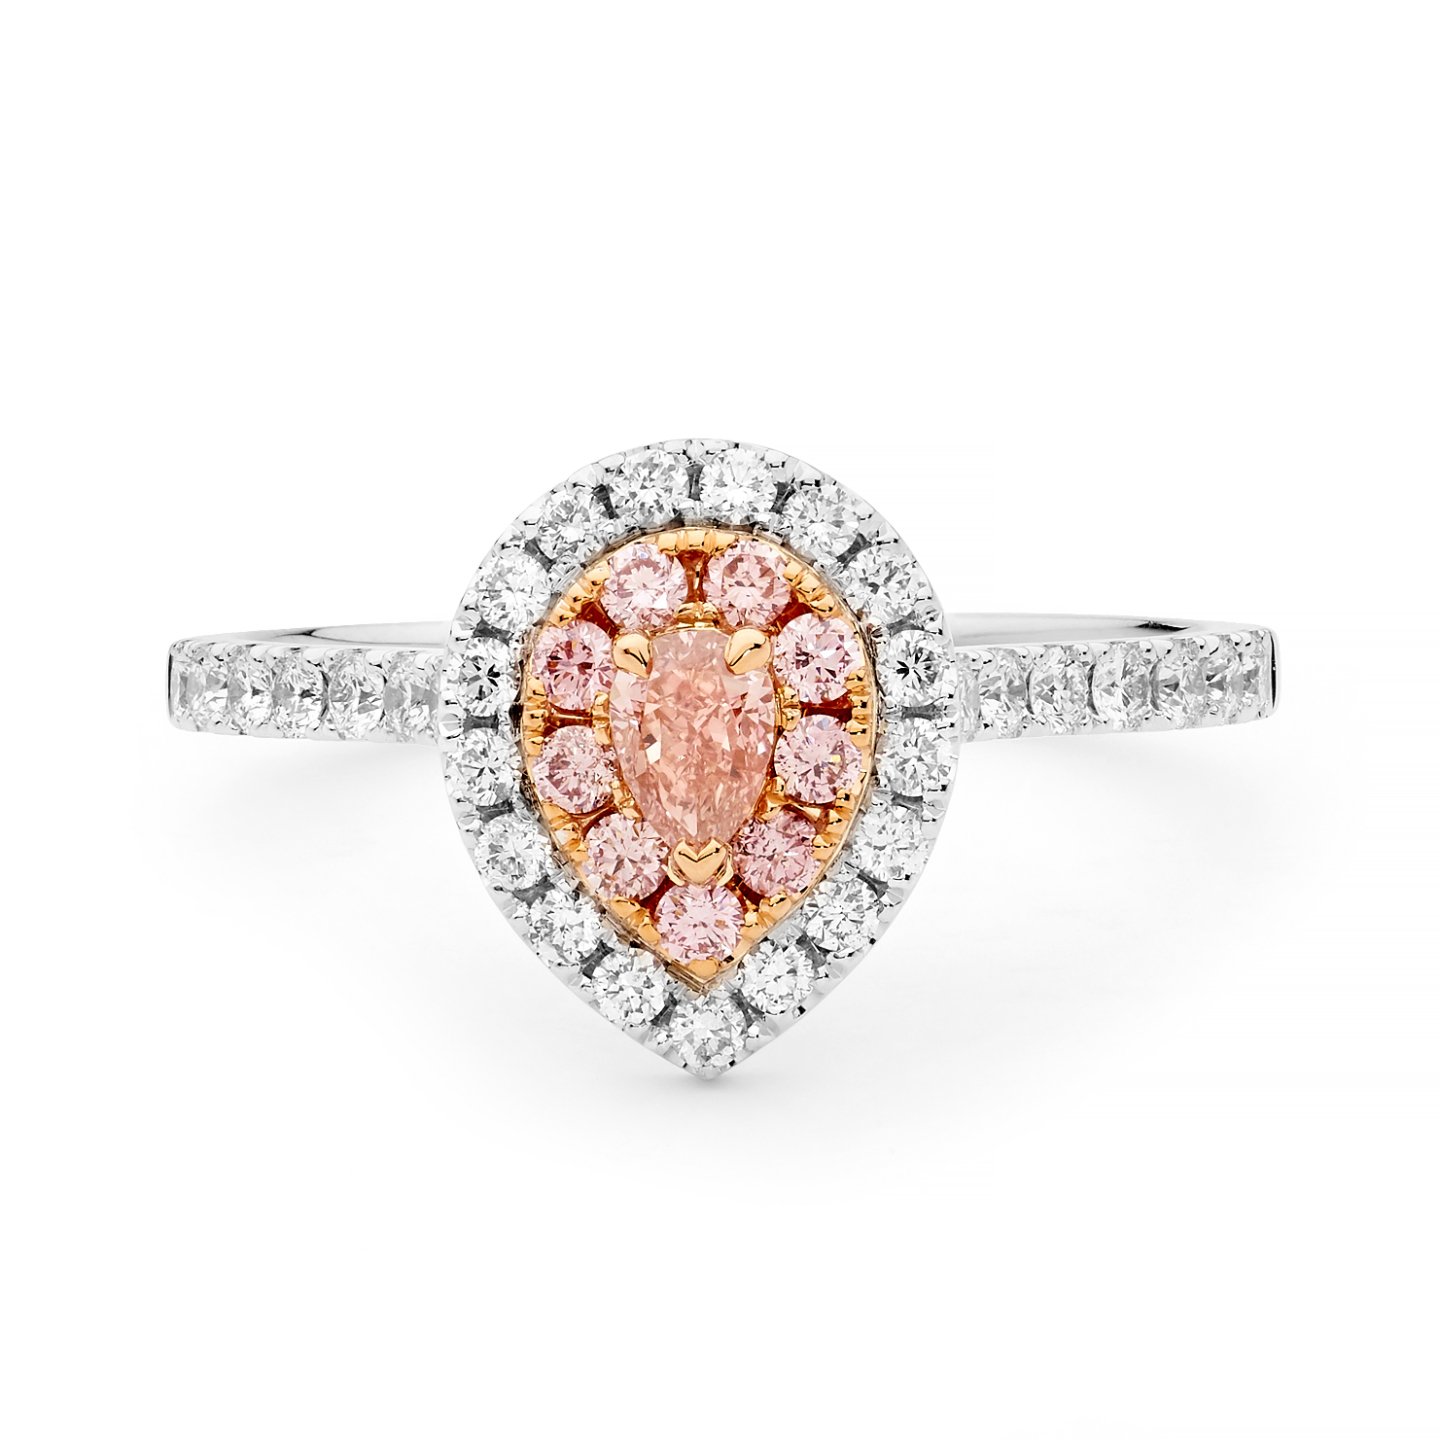 Introducing 'EDJR002' - the symphony of Desert Rose's finest craftsmanship, featuring a pear-cut pink diamond center cradled by an inner halo of Argyle's coveted pink diamonds. The outer halo sparkles with brilliant white diamonds, cascading down the